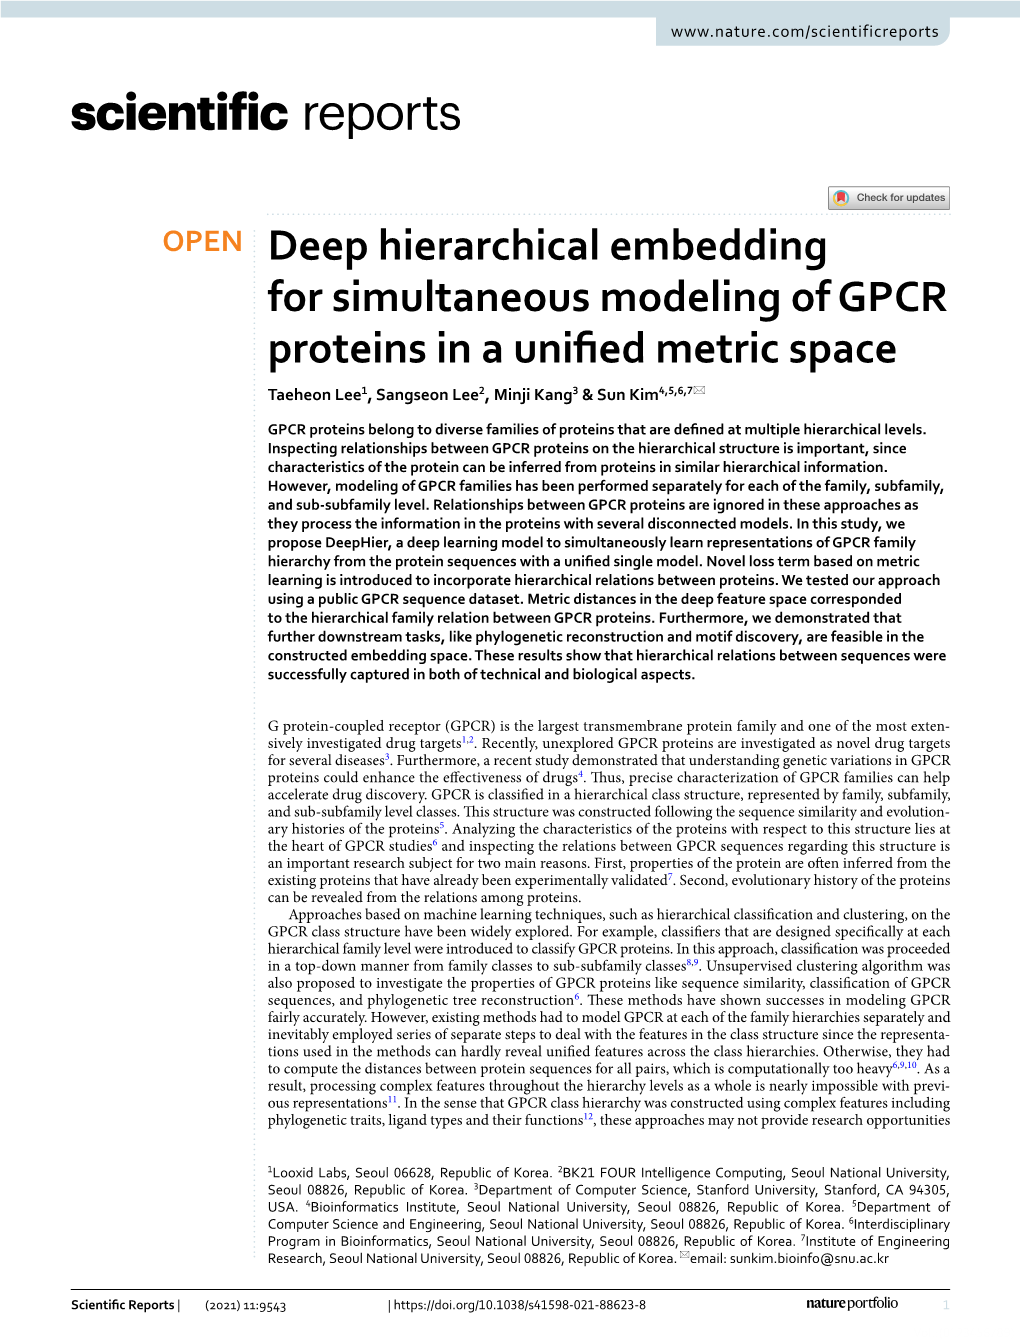 Deep Hierarchical Embedding for Simultaneous Modeling of GPCR Proteins in a Unifed Metric Space Taeheon Lee1, Sangseon Lee2, Minji Kang3 & Sun Kim4,5,6,7*